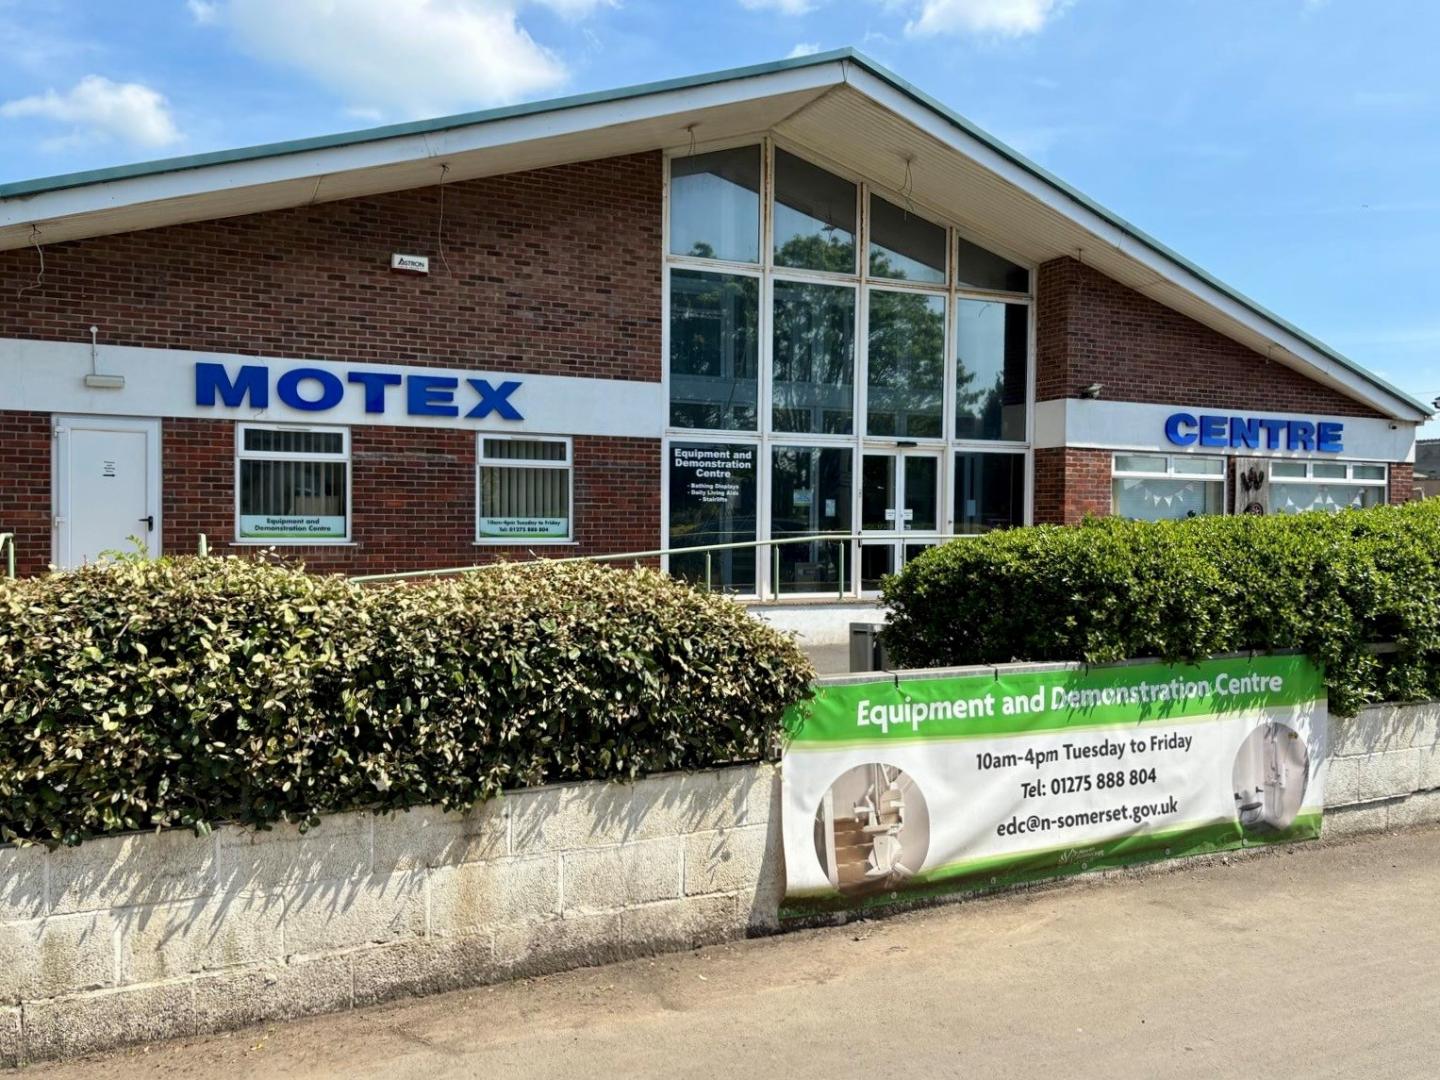 Front of the Motex Centre building on Winterstoke Road, Weston-super-Mare - home of the Equipment and Demonstration Centre (EDC)